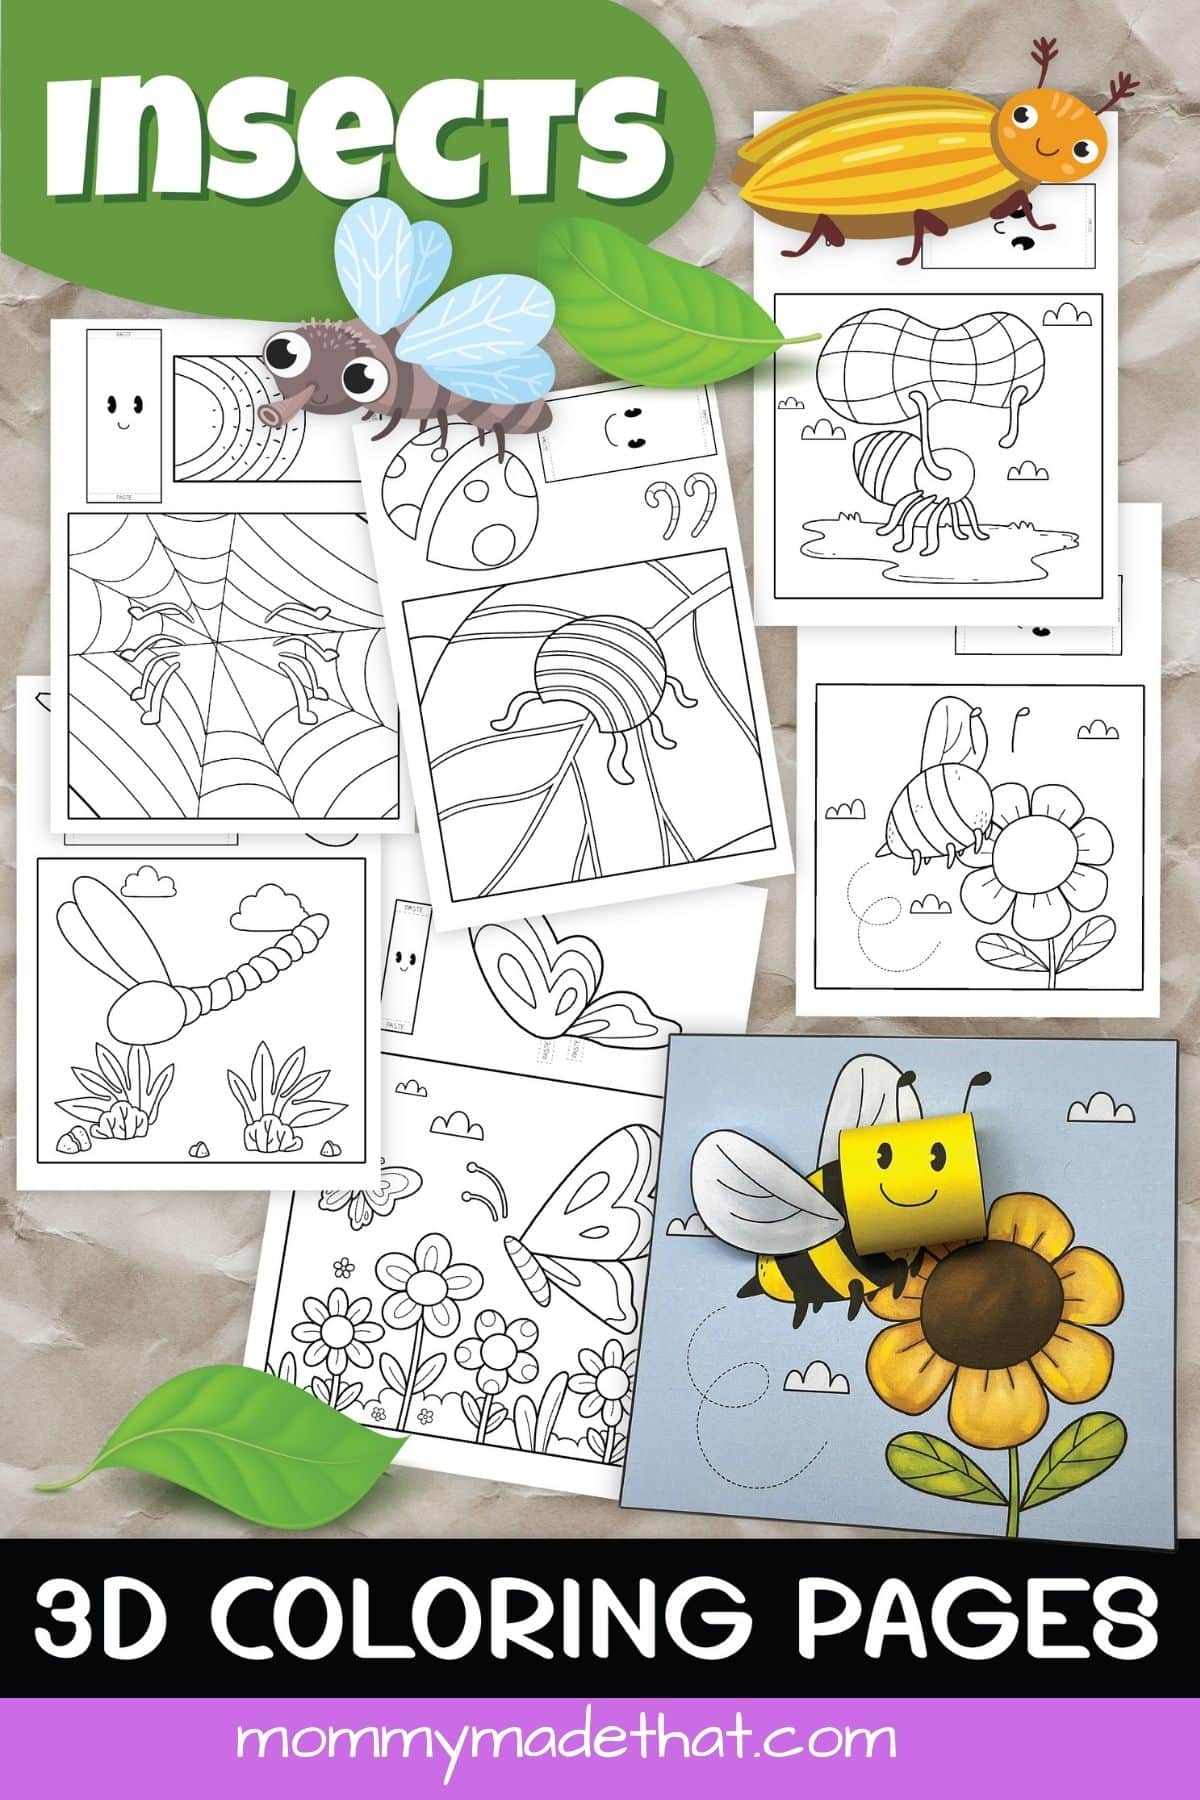 3D insect coloring pages. These fun bug coloring pages make the cutest 3D creatures kids will love.